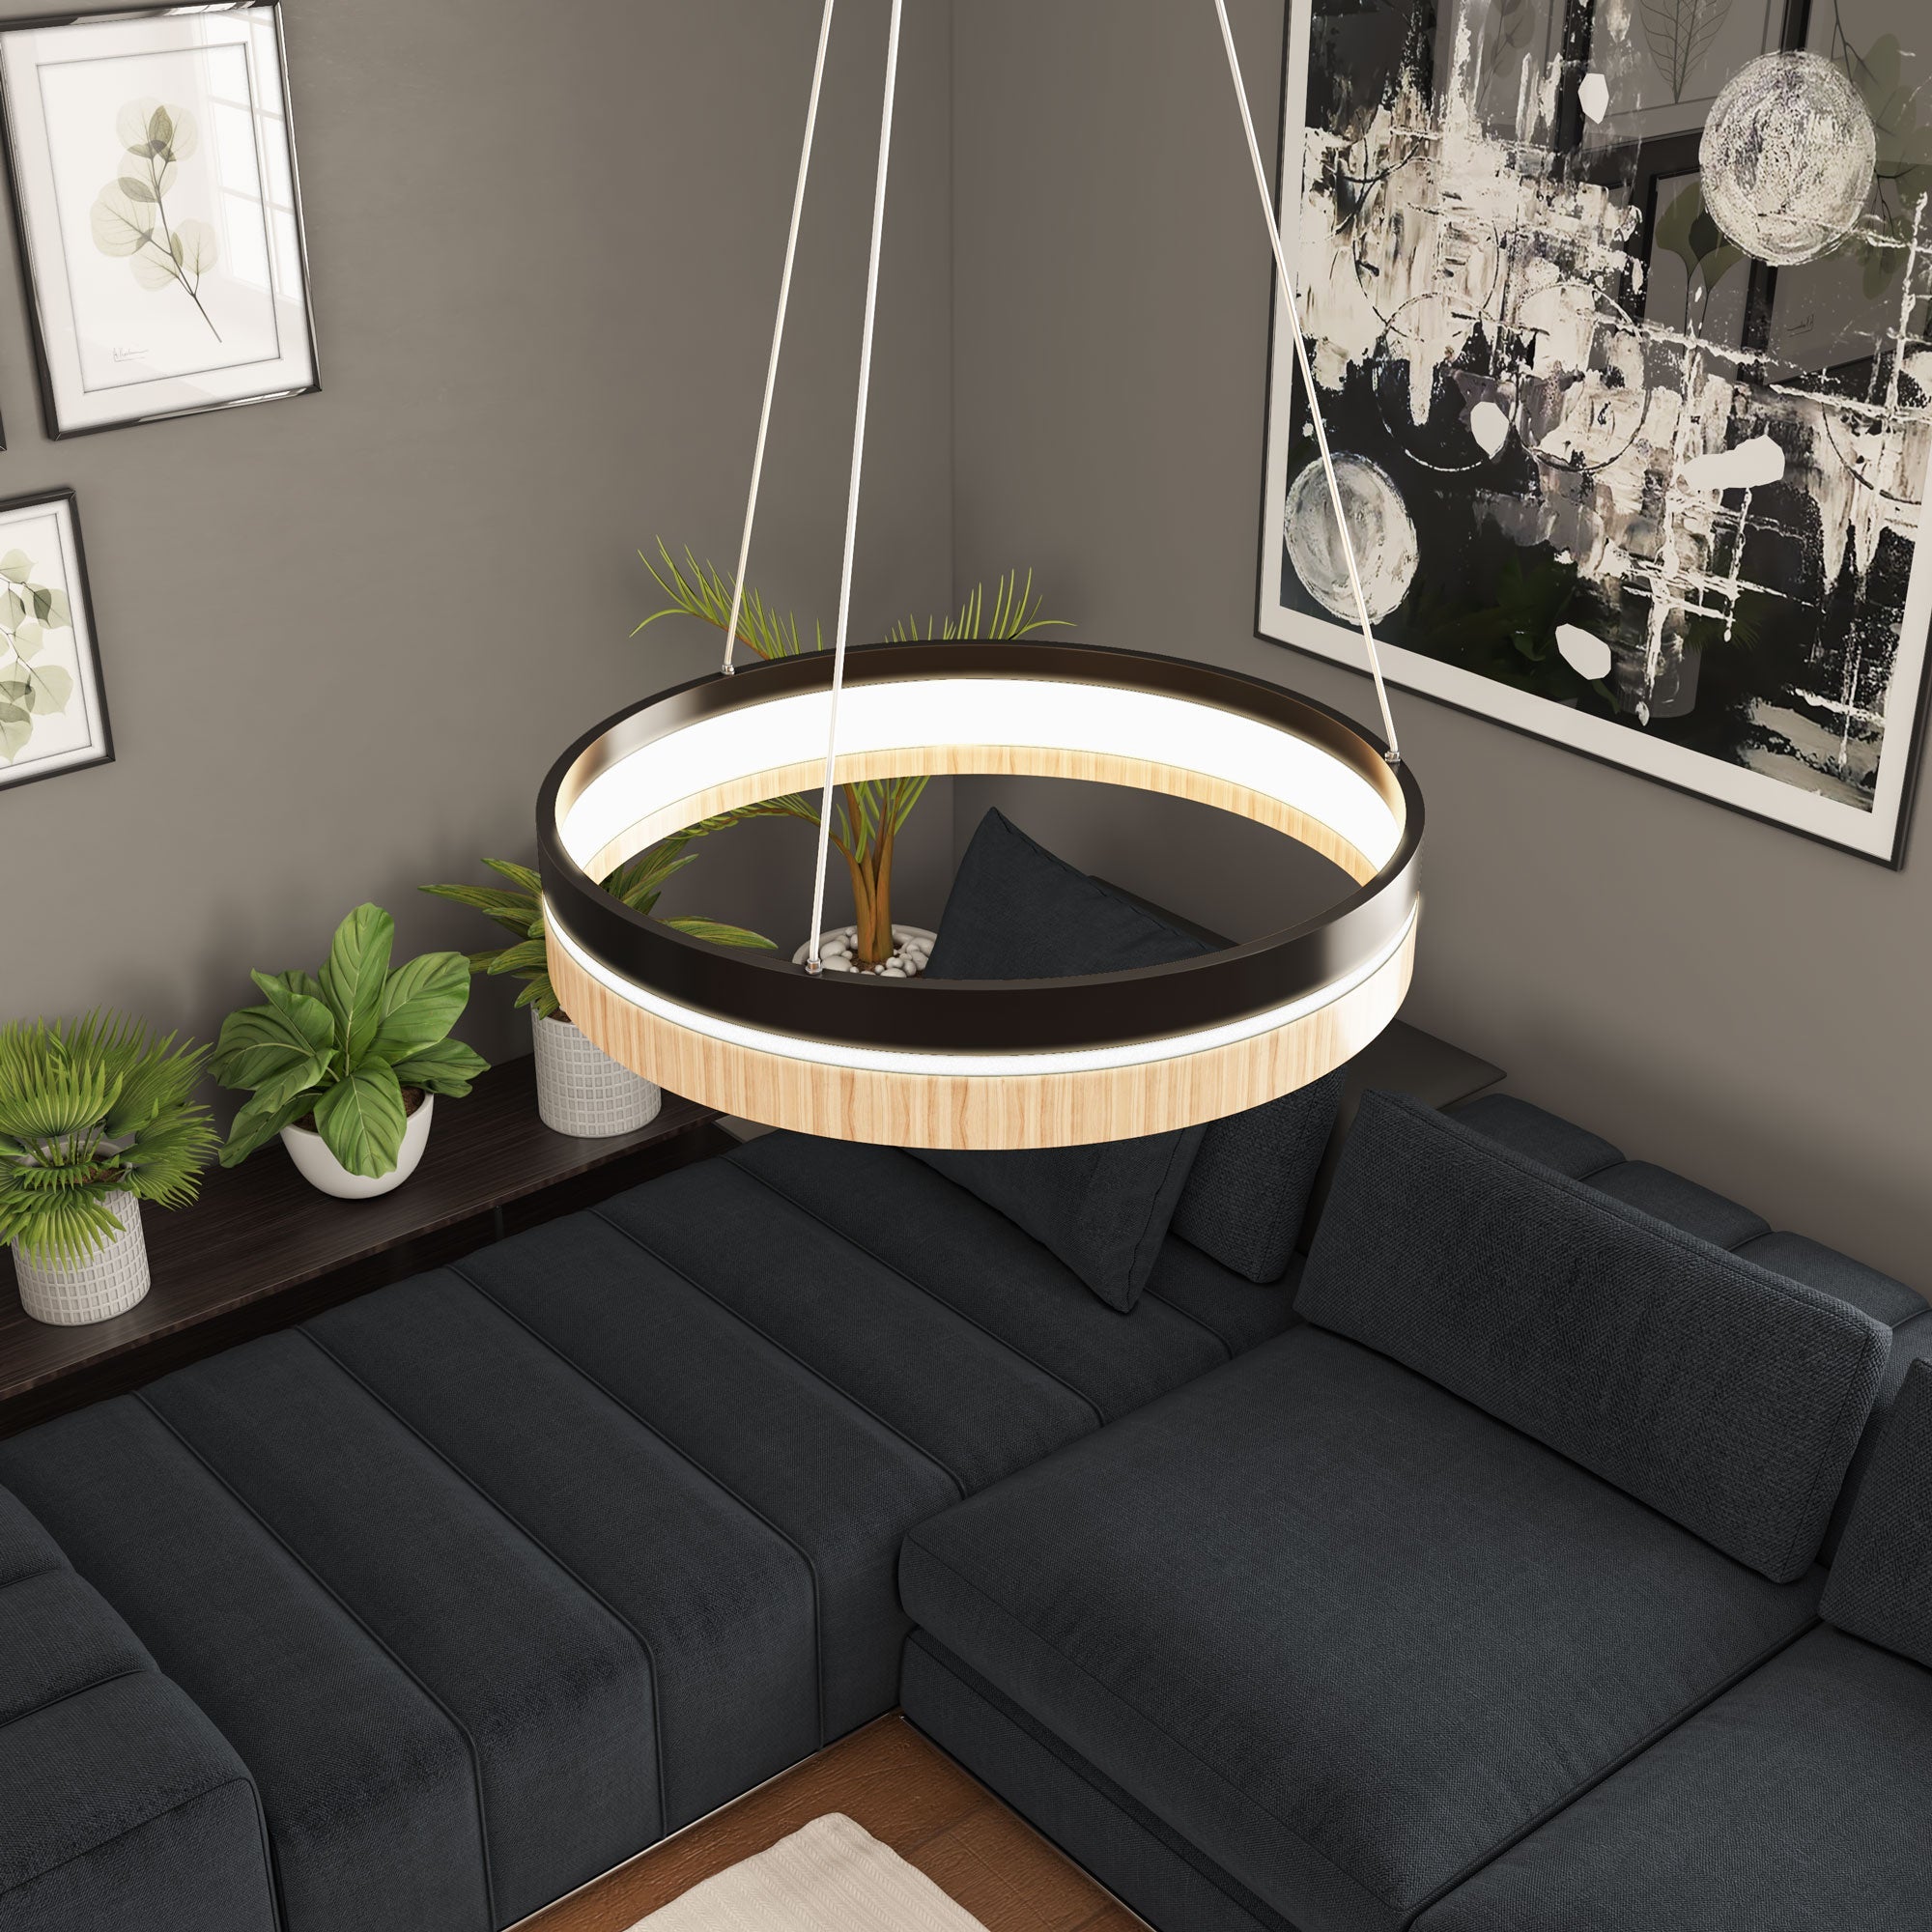 LED Pendant Light Fixture, Round, Dimmable, 3000K (Warm White), Wood and Matte Black